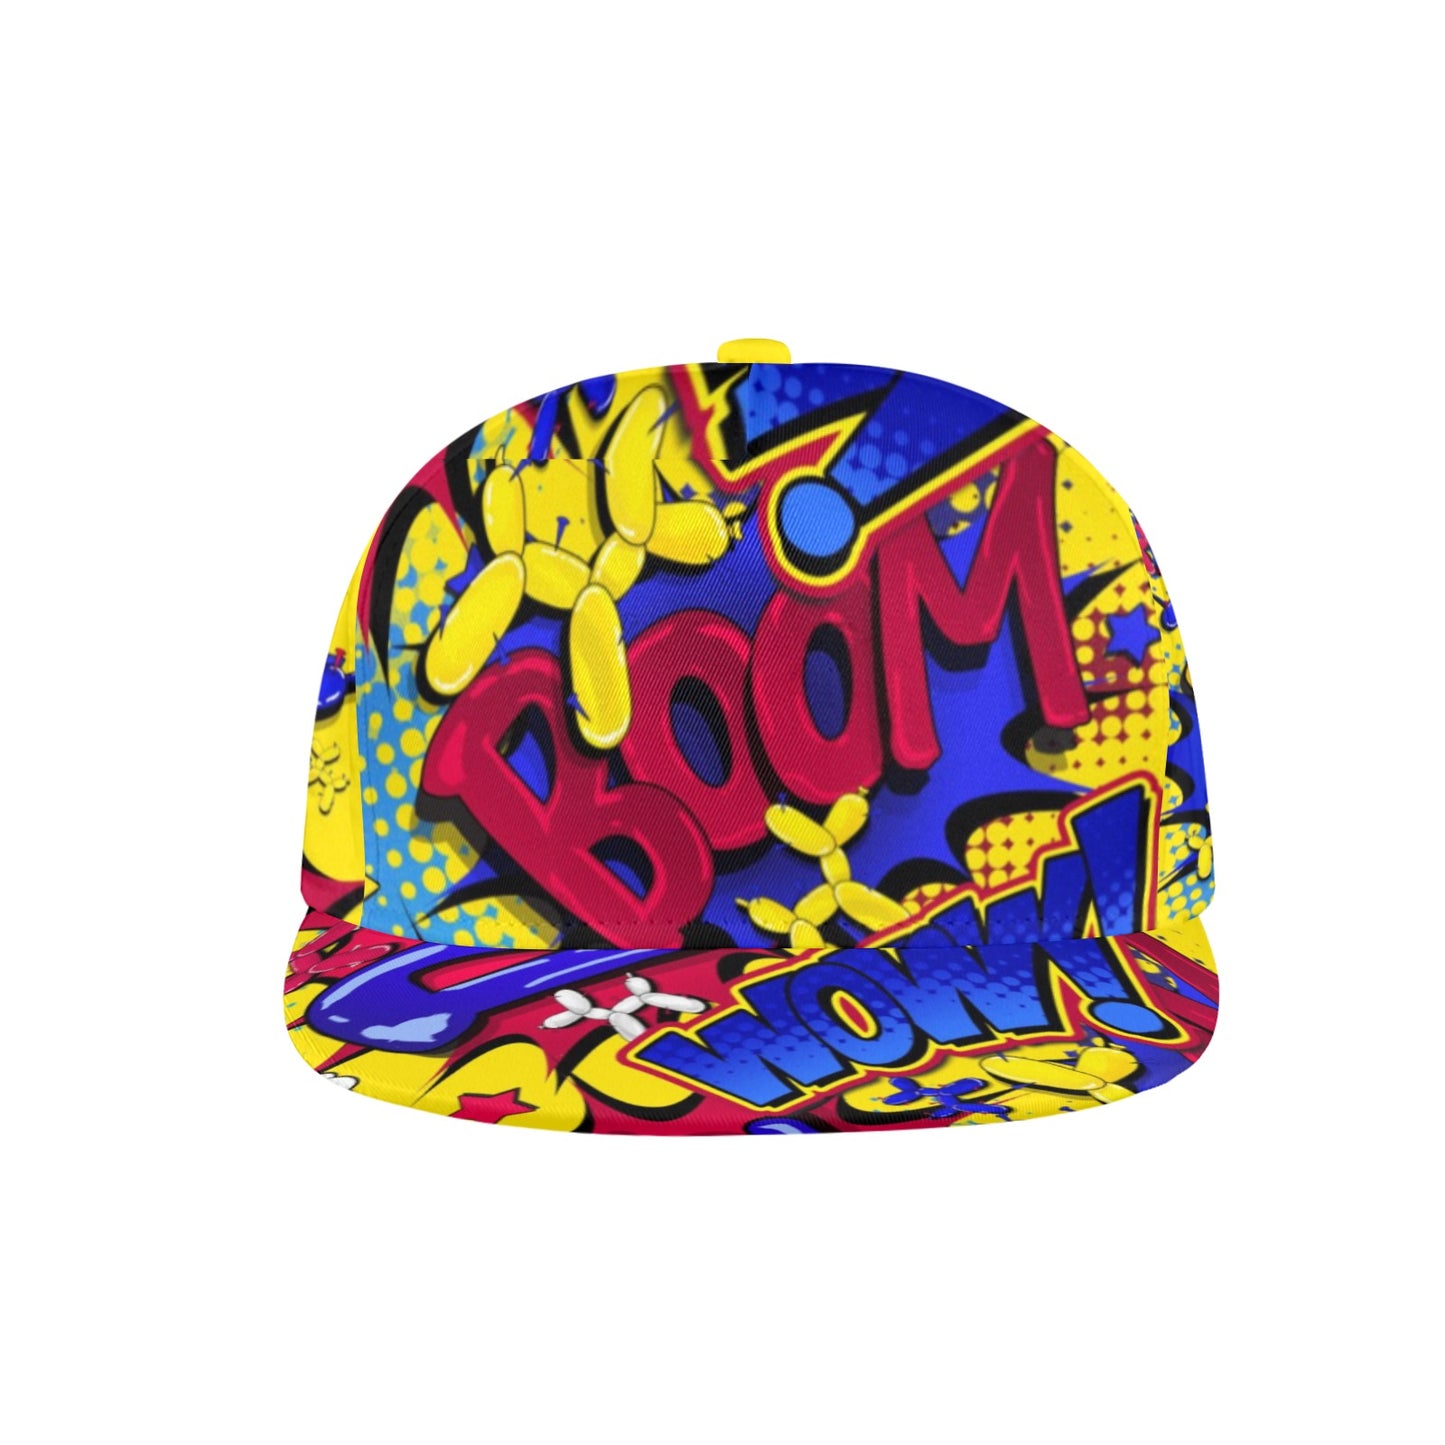 Balloon Dog Snapback Cap for Balloon twisters and Face Painters